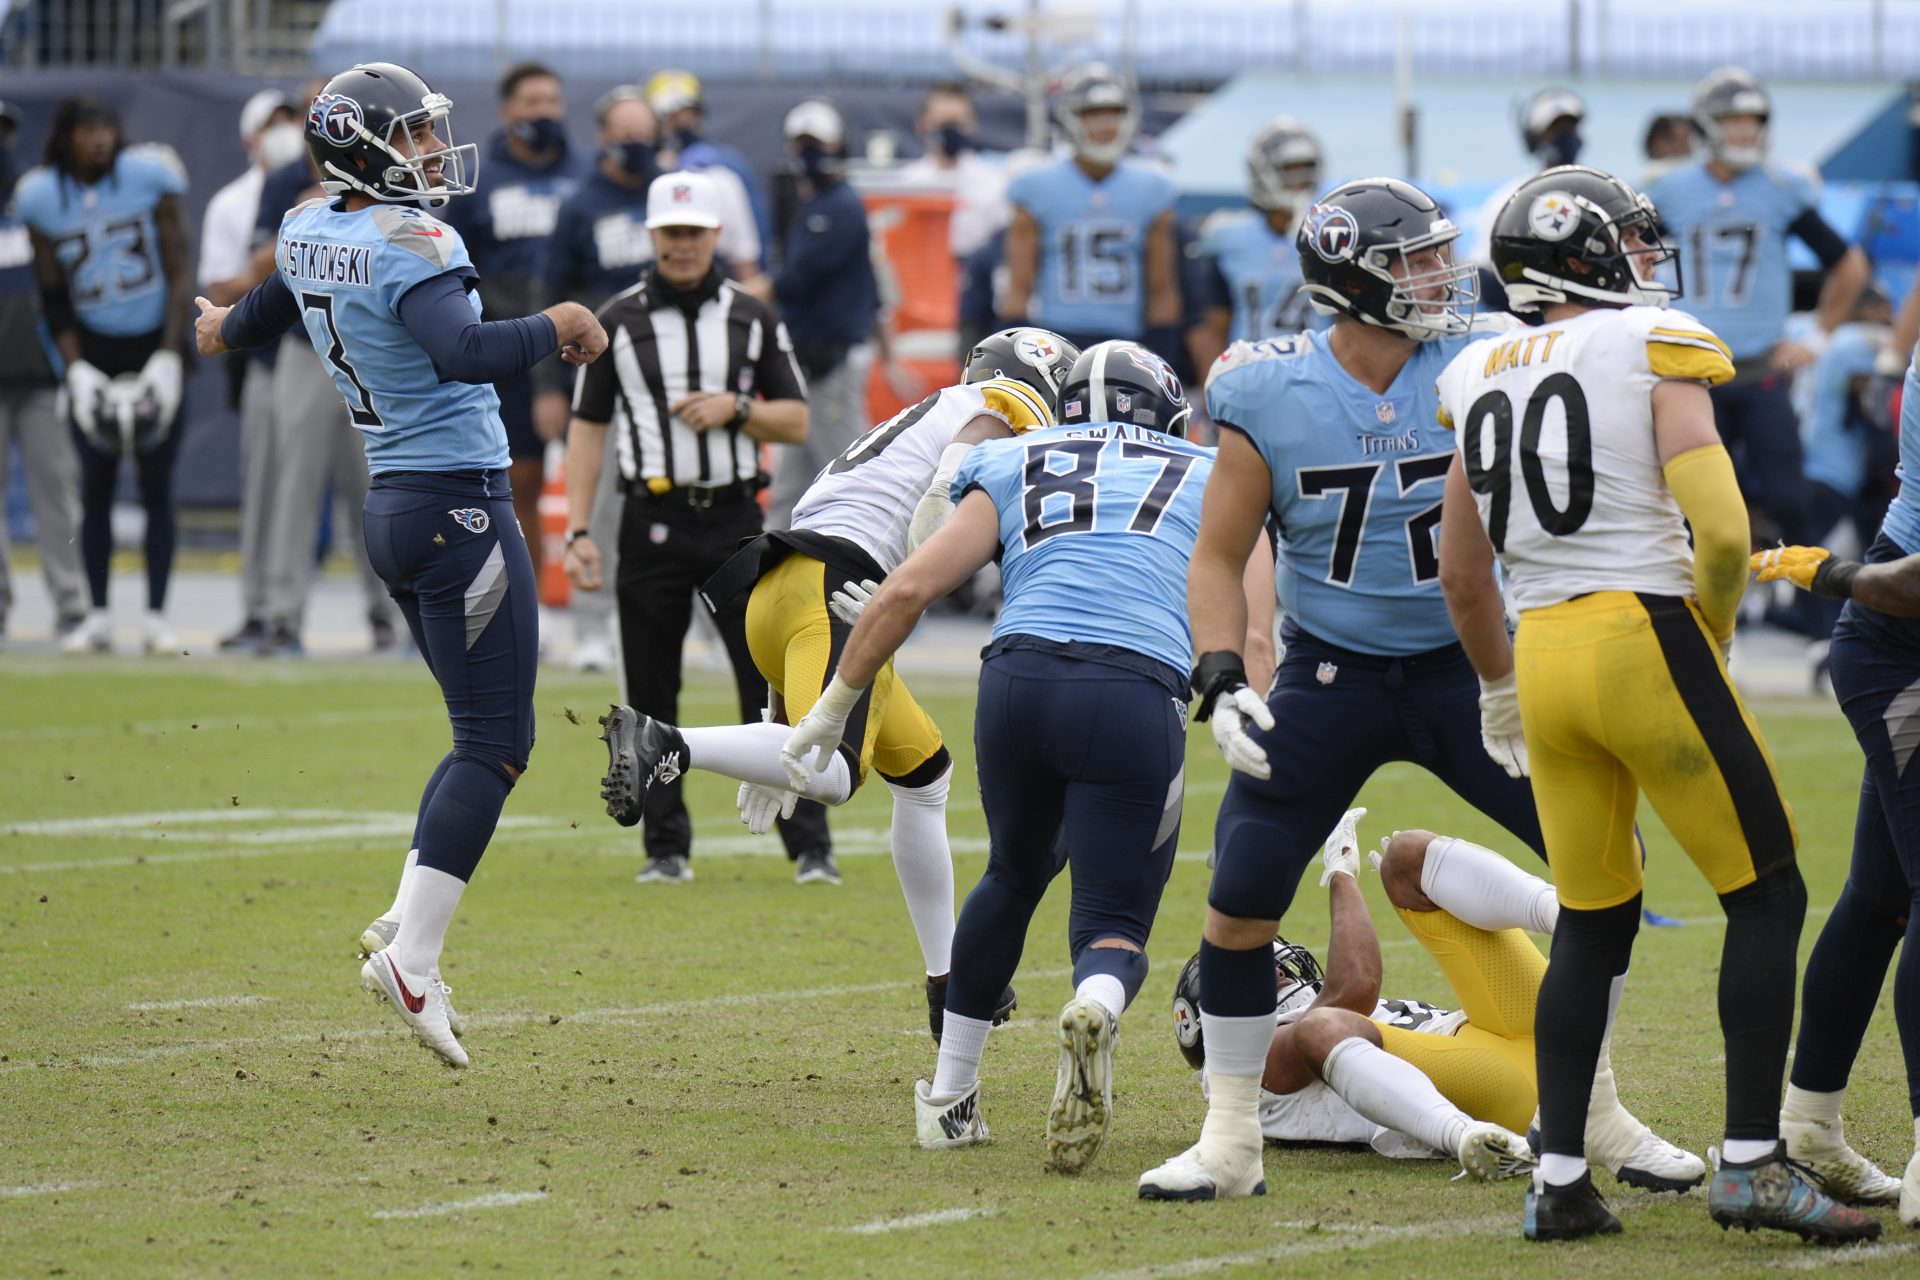 Tennessee Titans kicker Stephen Gostkowski (3) watches as his 45-yard field goal attempt against the Pittsburgh Steelers sails wide in the final seconds of the fourth quarter of an NFL football game Sunday, Oct. 25, 2020, in Nashville, Tenn. The Steelers won 27-24.